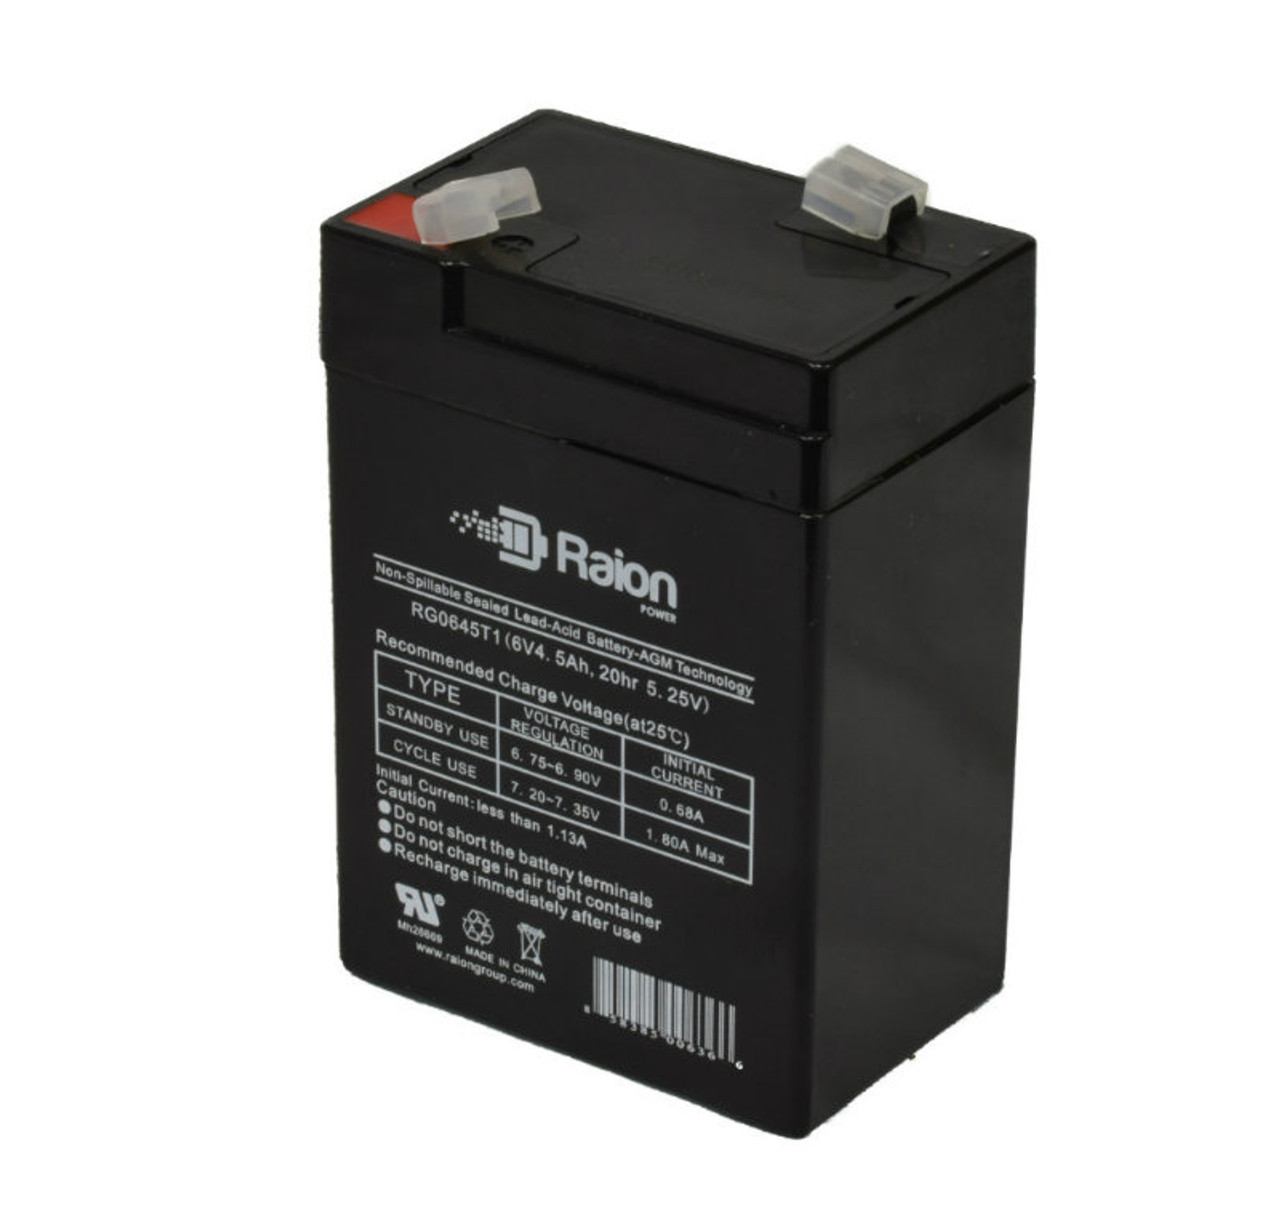 Raion Power RG0645T1 6V 4.5Ah Replacement Battery Cartridge for Emergency EML-950